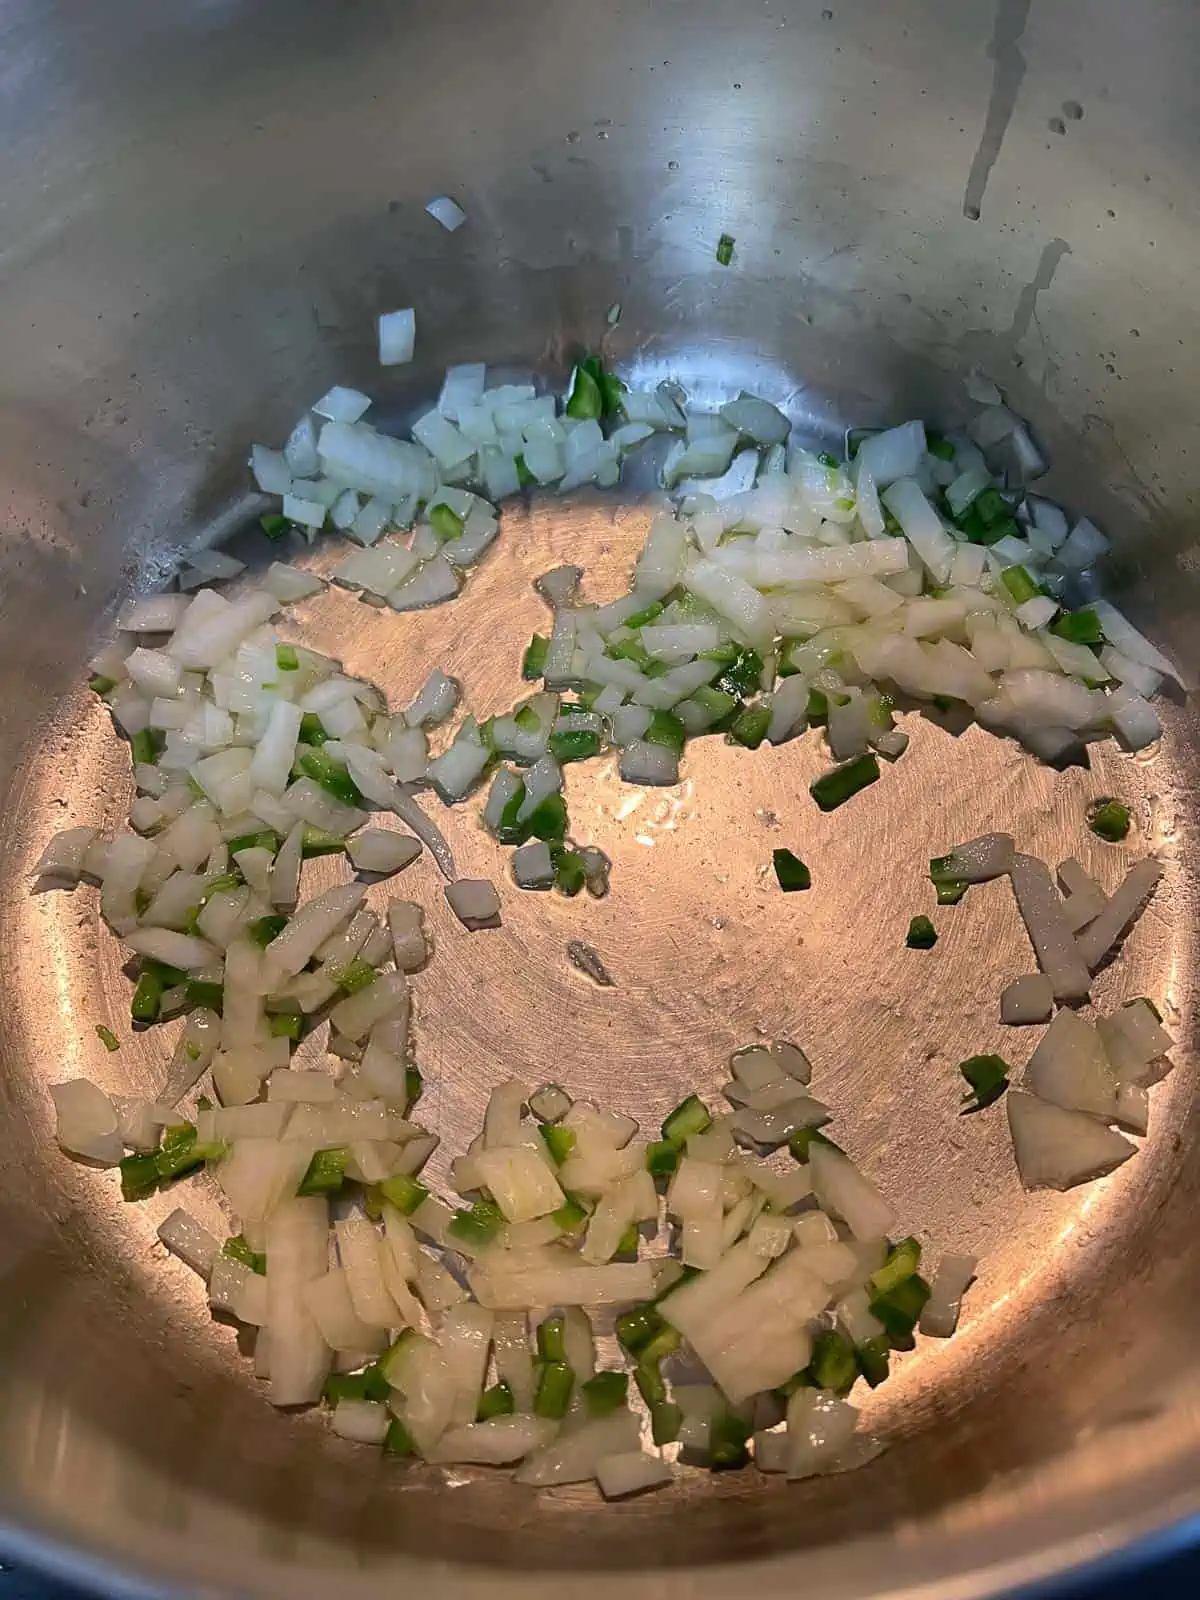 Onions and jalapeno cooking in a pot.